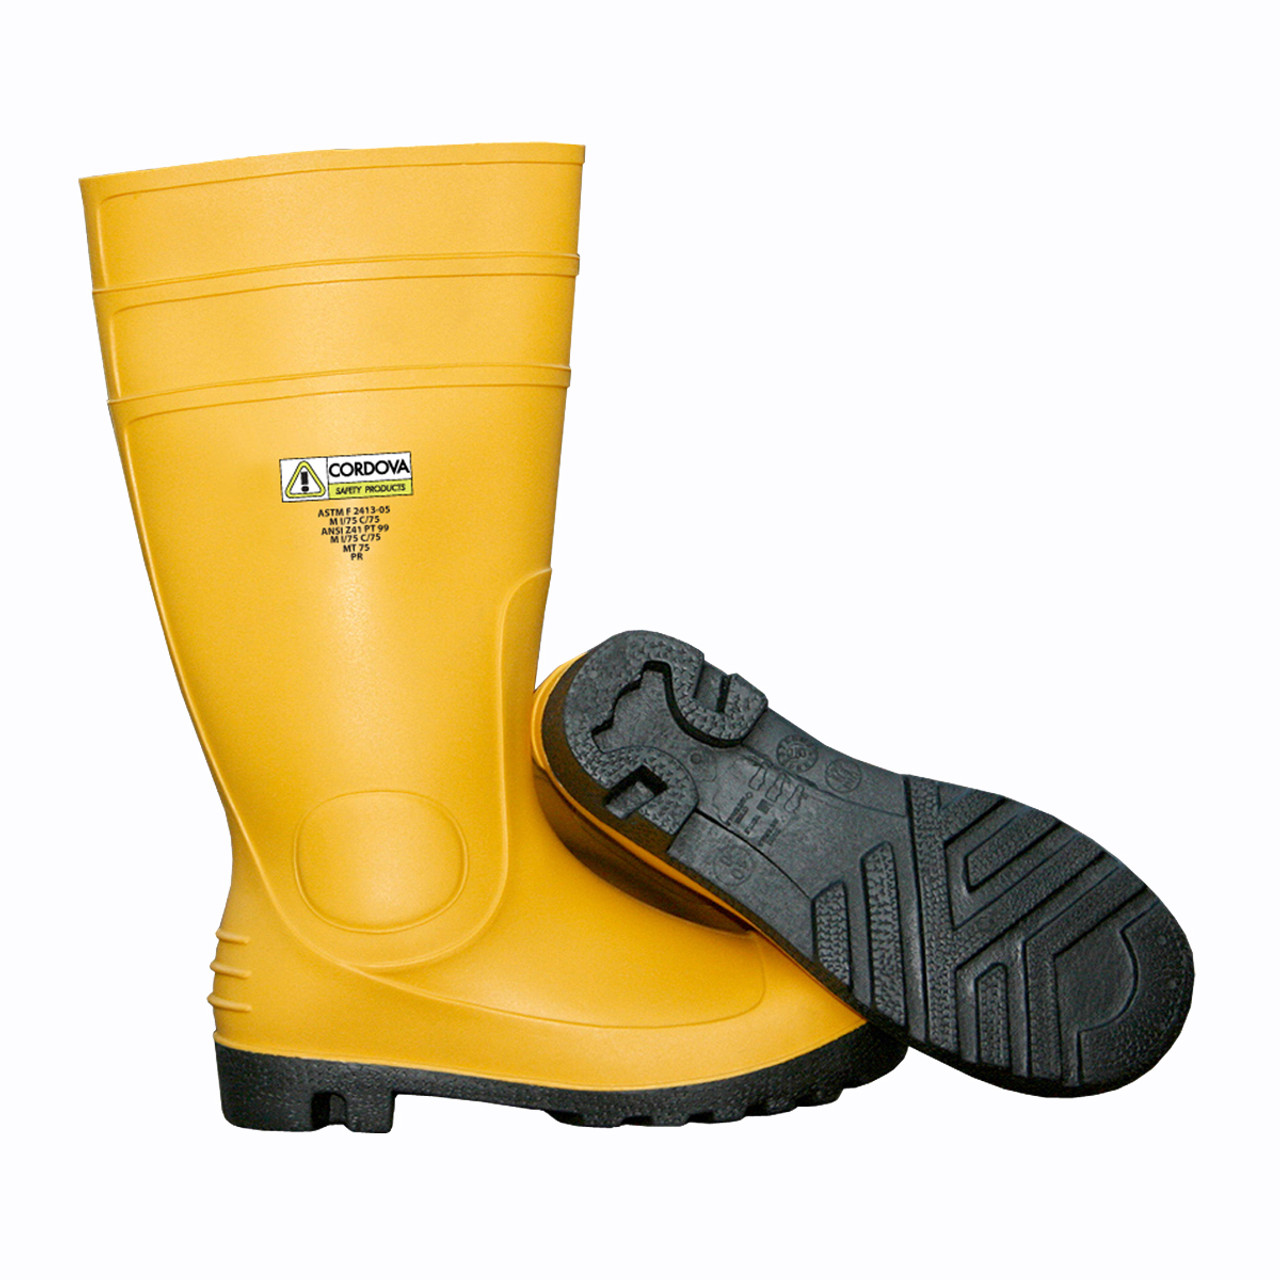 nitrile sole safety shoes